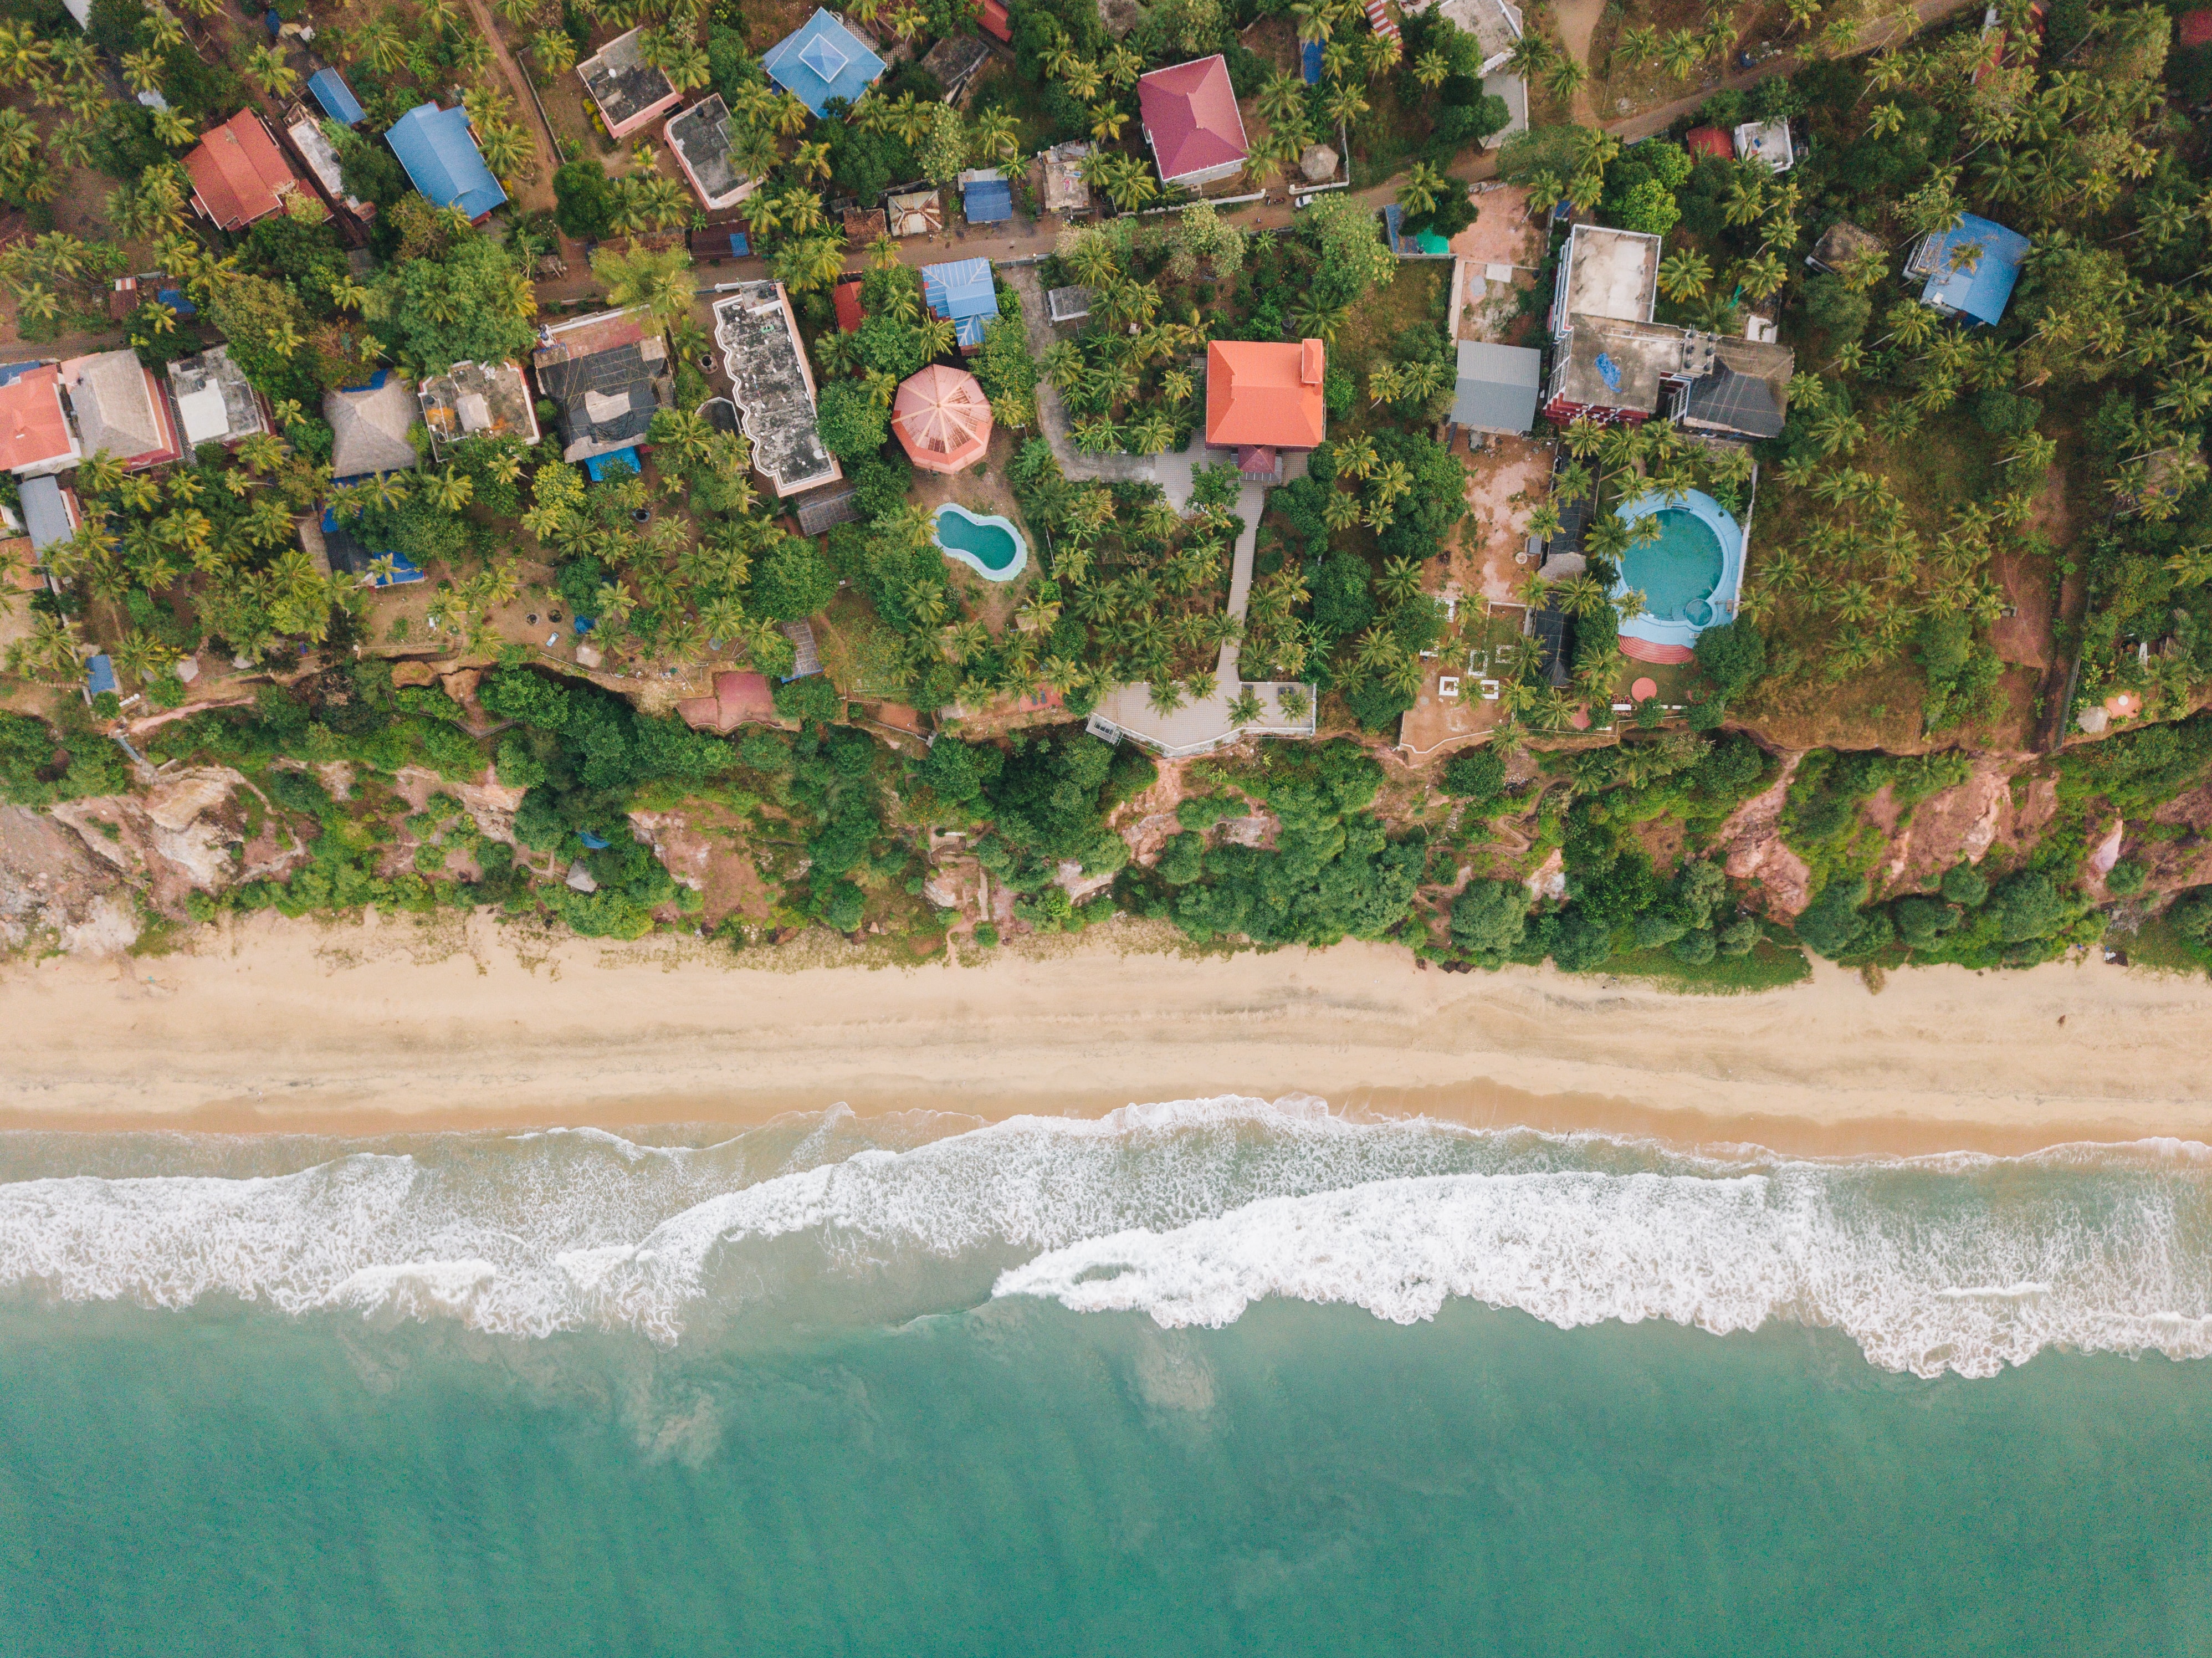 shore, view from above, nature, beach, palms, building, bank UHD